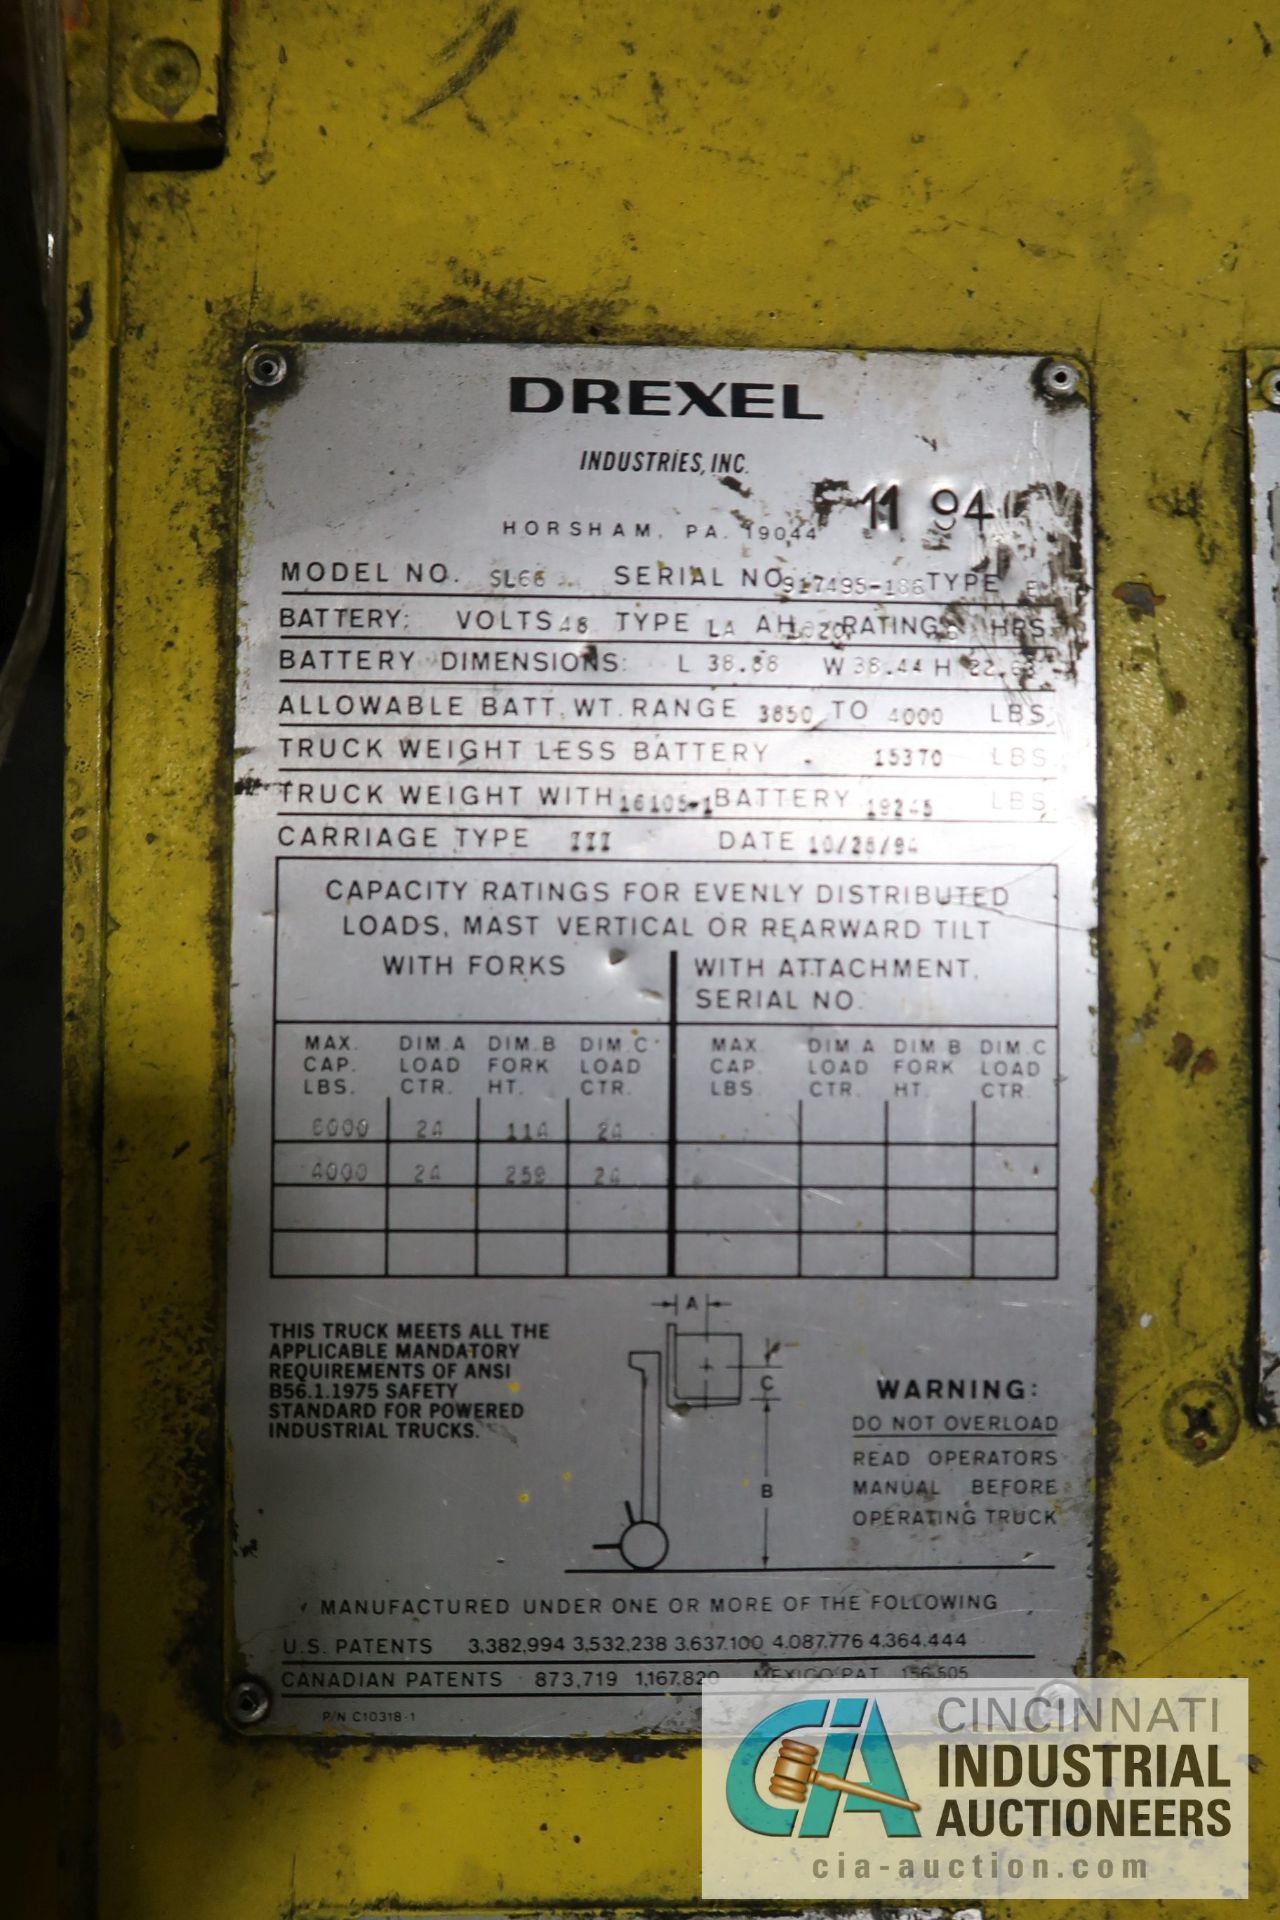 6,500 LB DREXEL MODEL SL66 SWING MAST ELECTRIC SOLID TIRE LIFT TRUCK; S/N 917495-186, 3-STAGE - Image 9 of 10